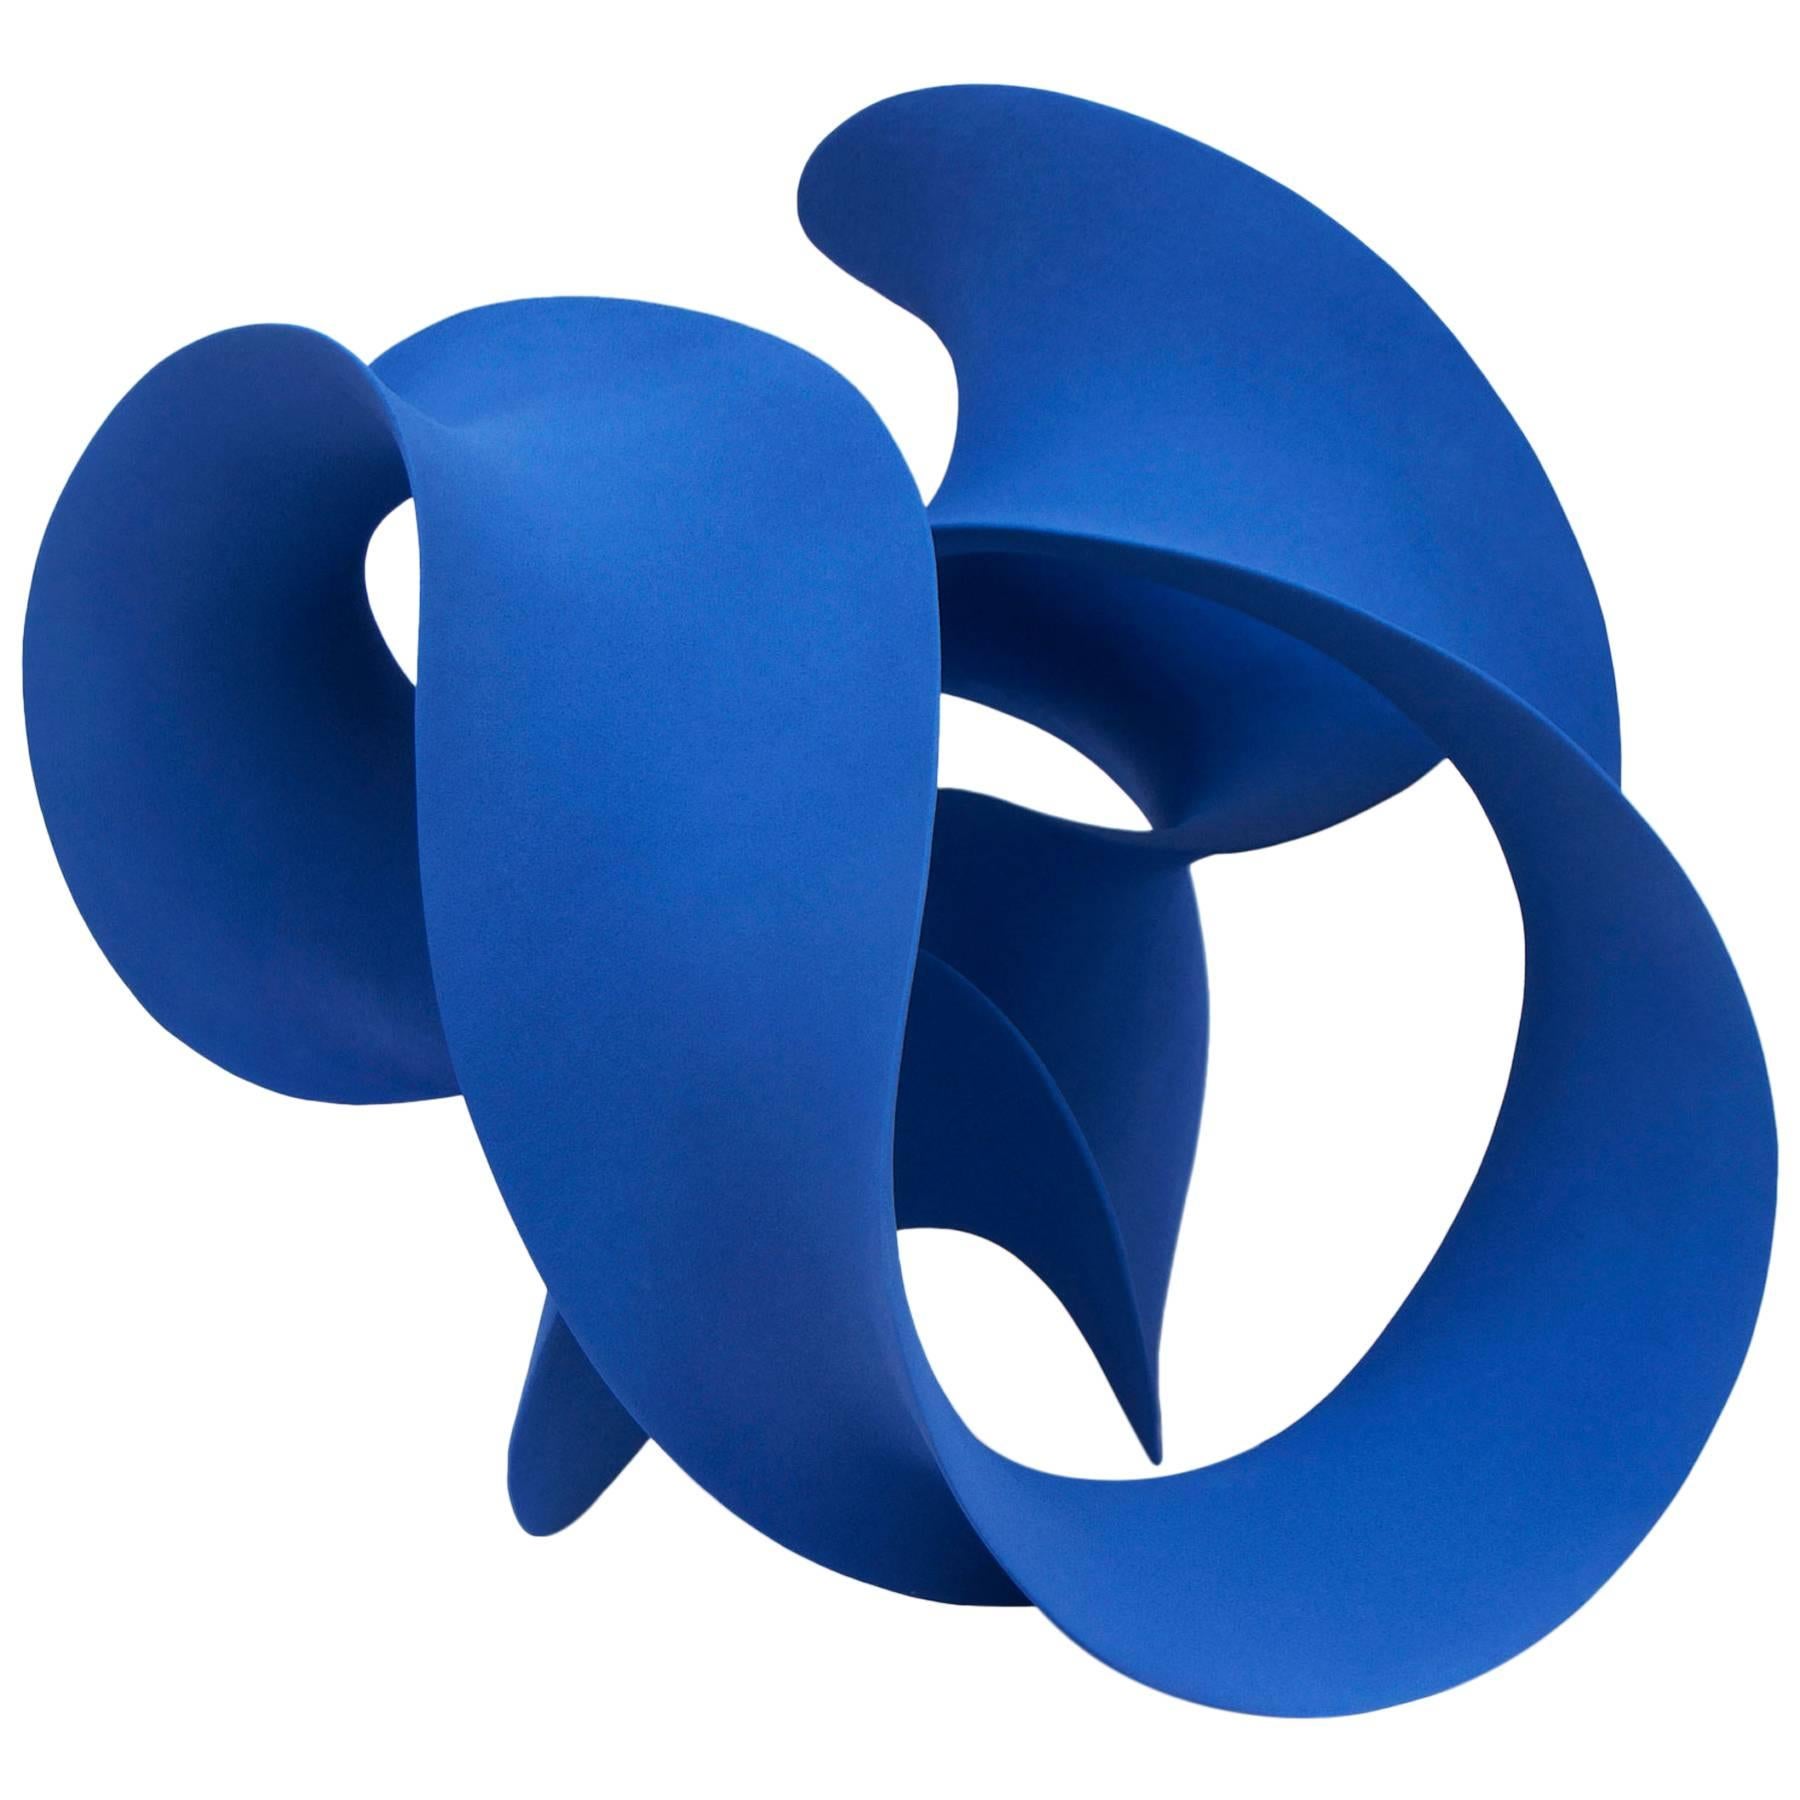 "Blue Twisted Form" by Merete Rasmussen